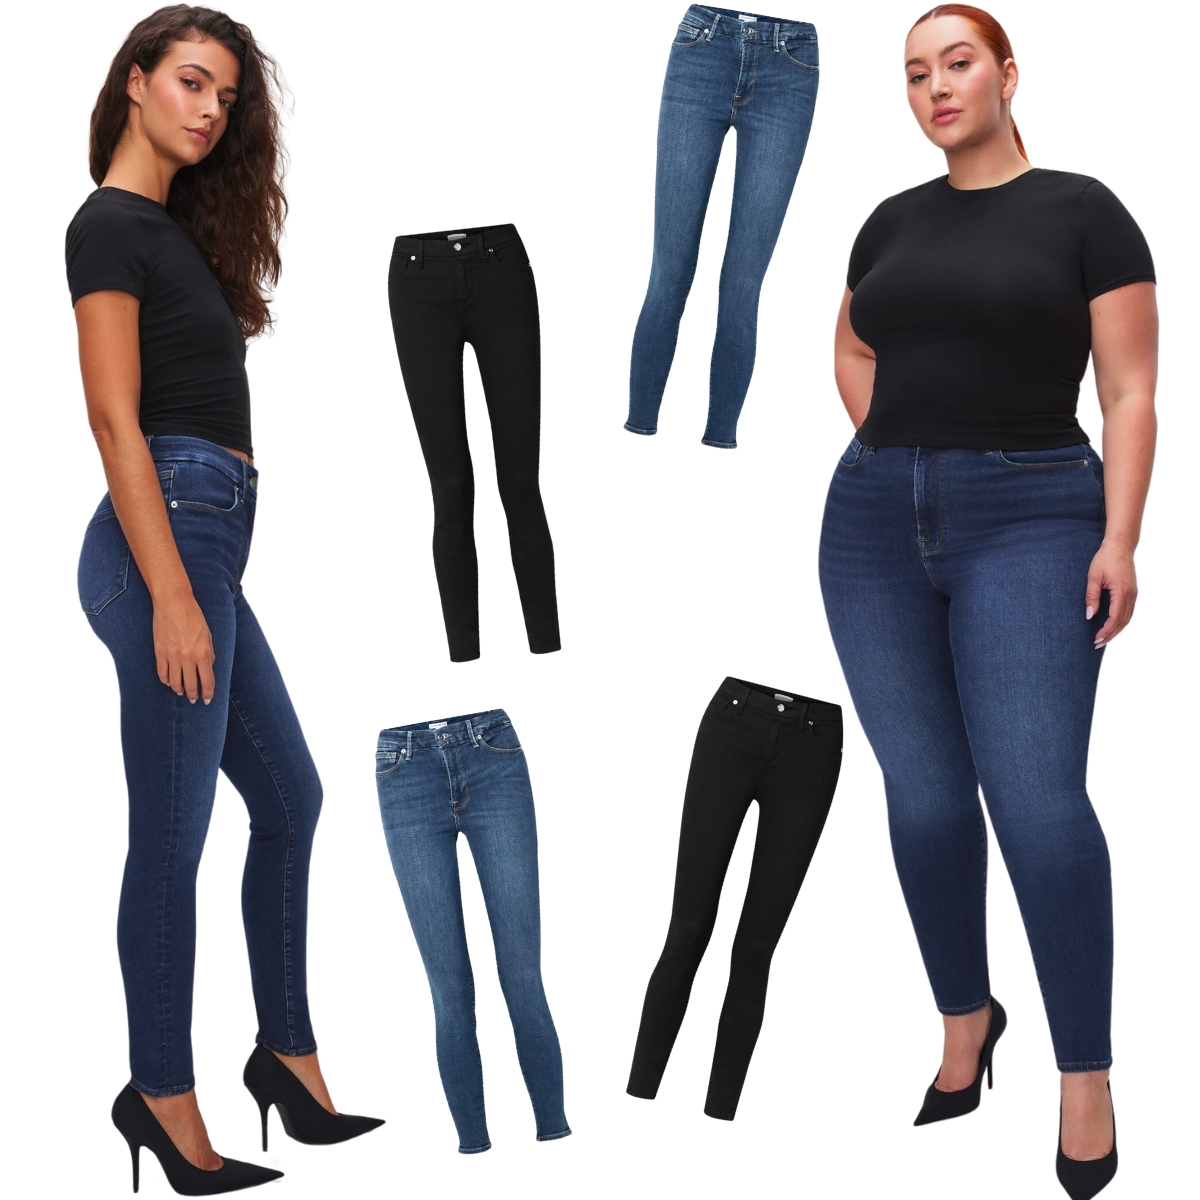 Black Leggings Under Ripped Jeans: Stay Warm Look Cute The, 56% OFF